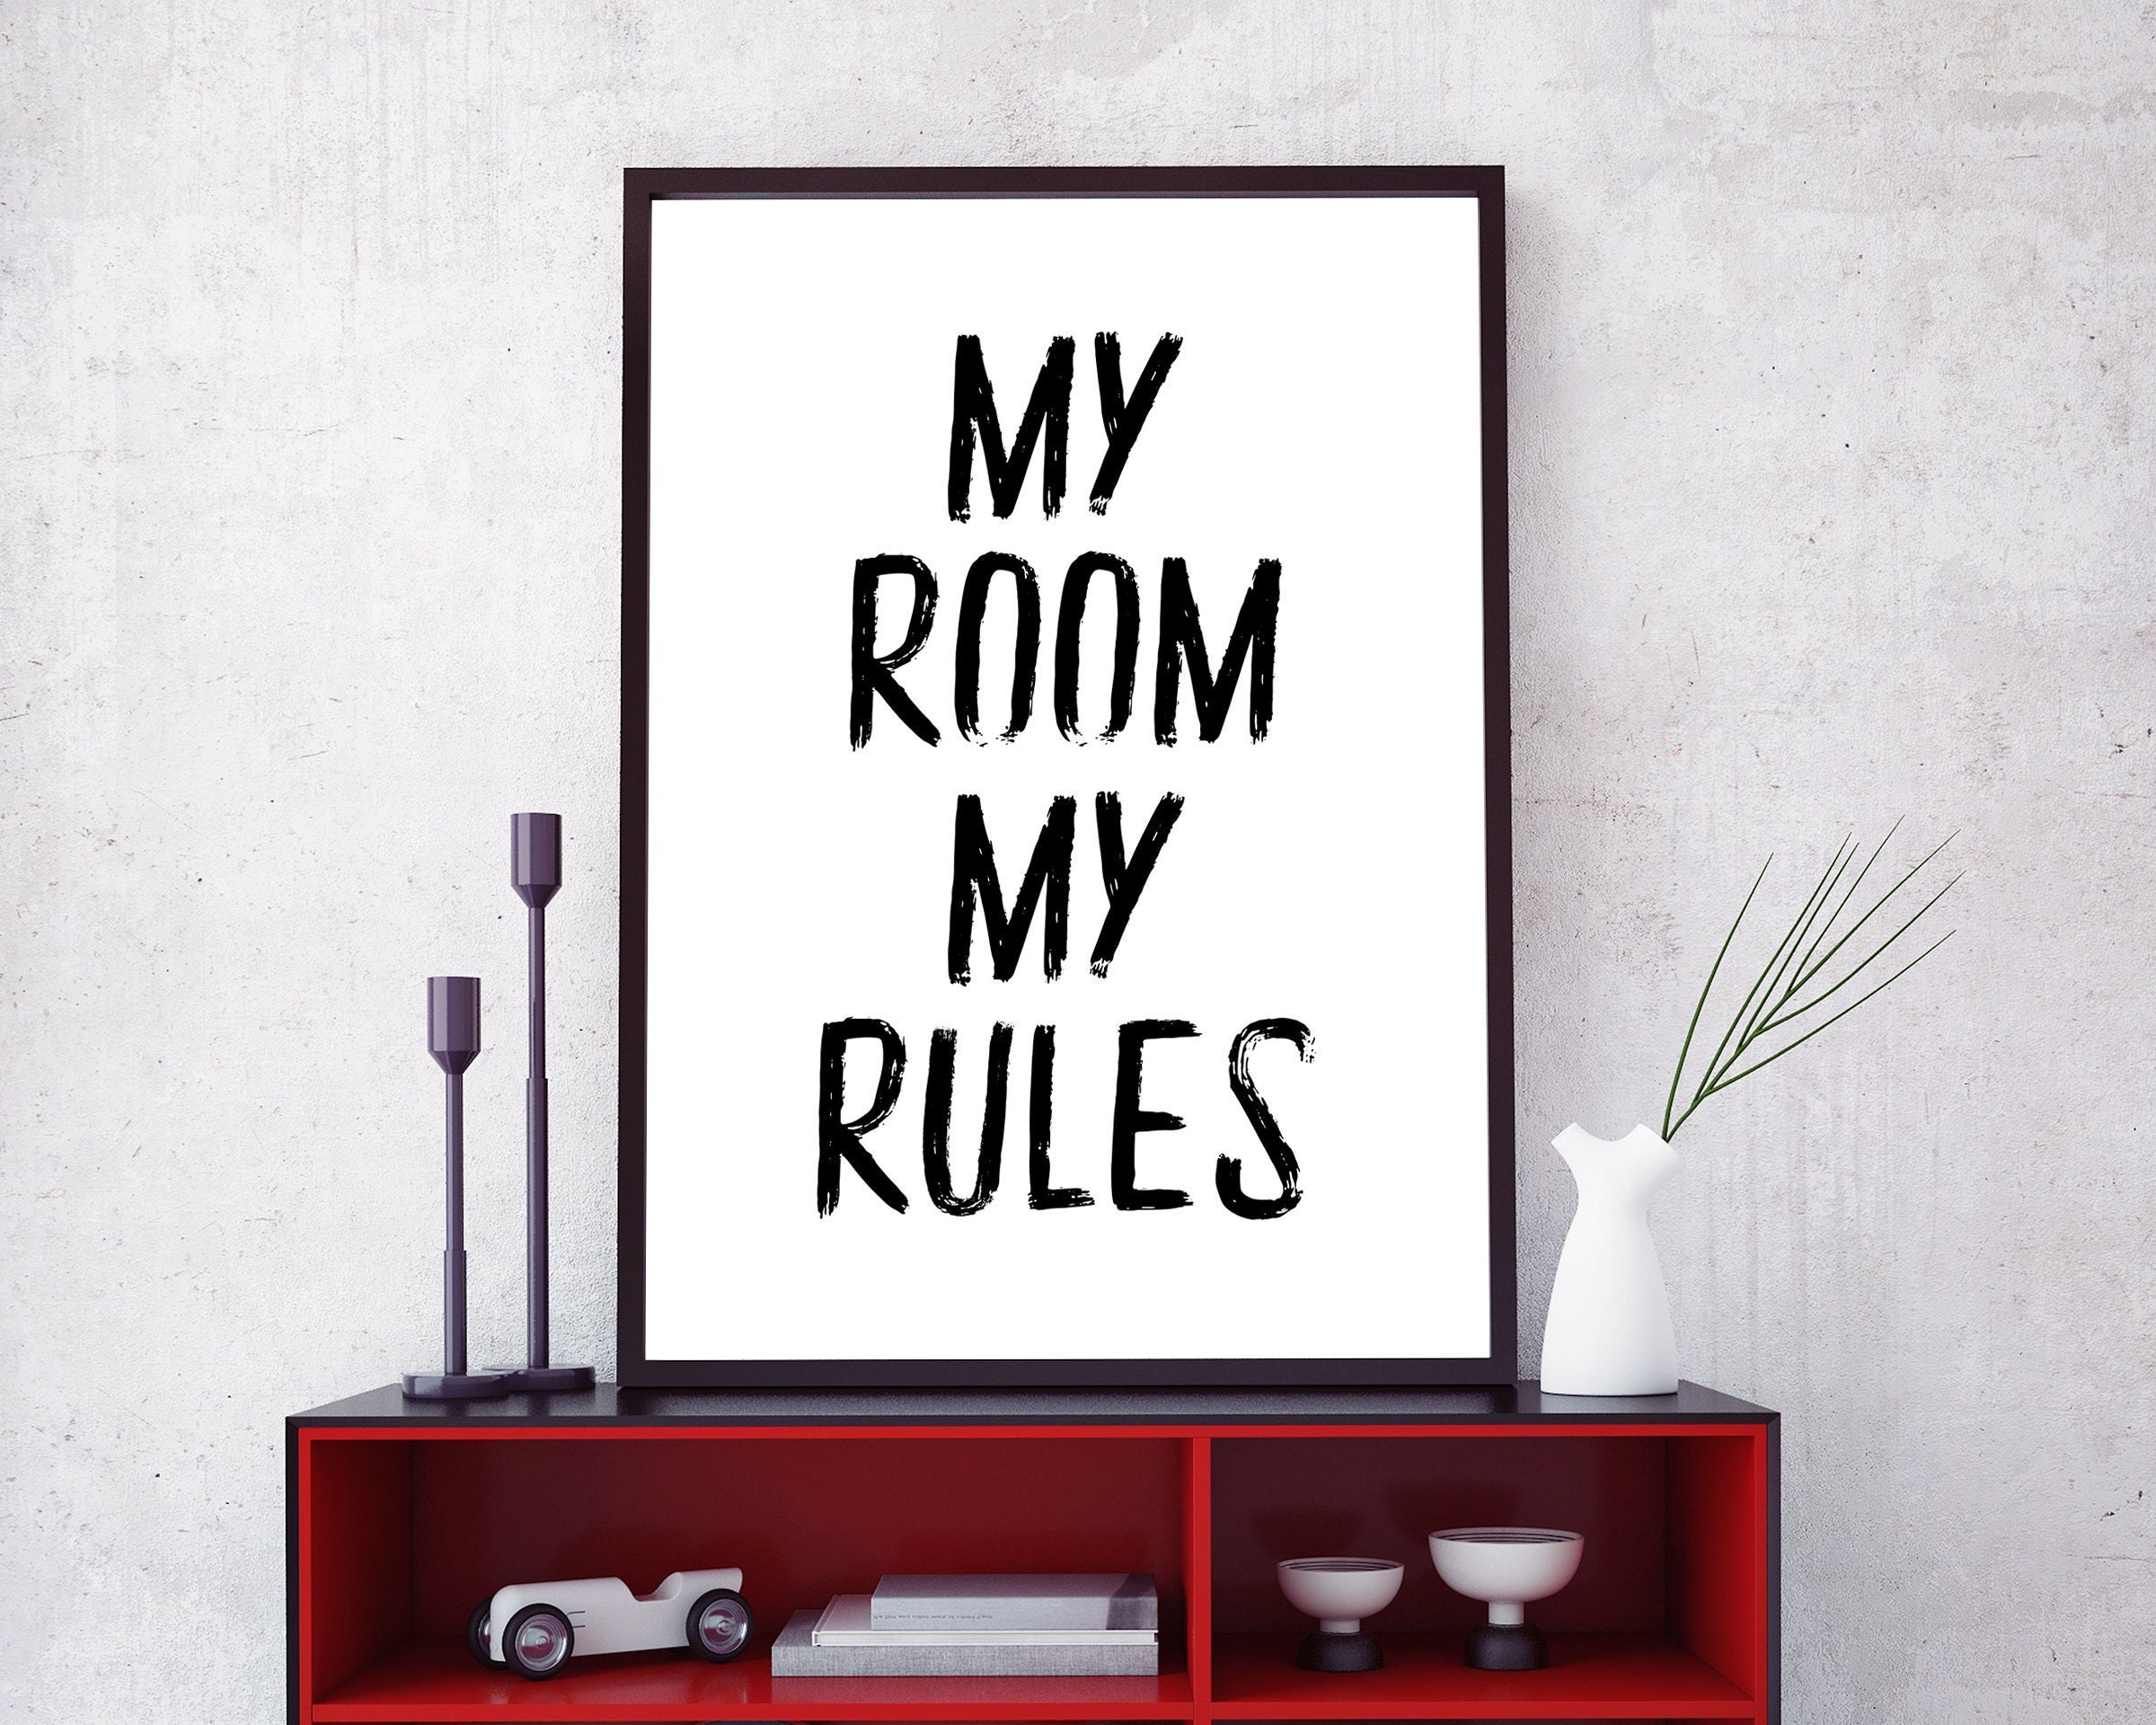 My Room Rules. My Room my Rules. My Bedroom Rules. Rules for my Room.